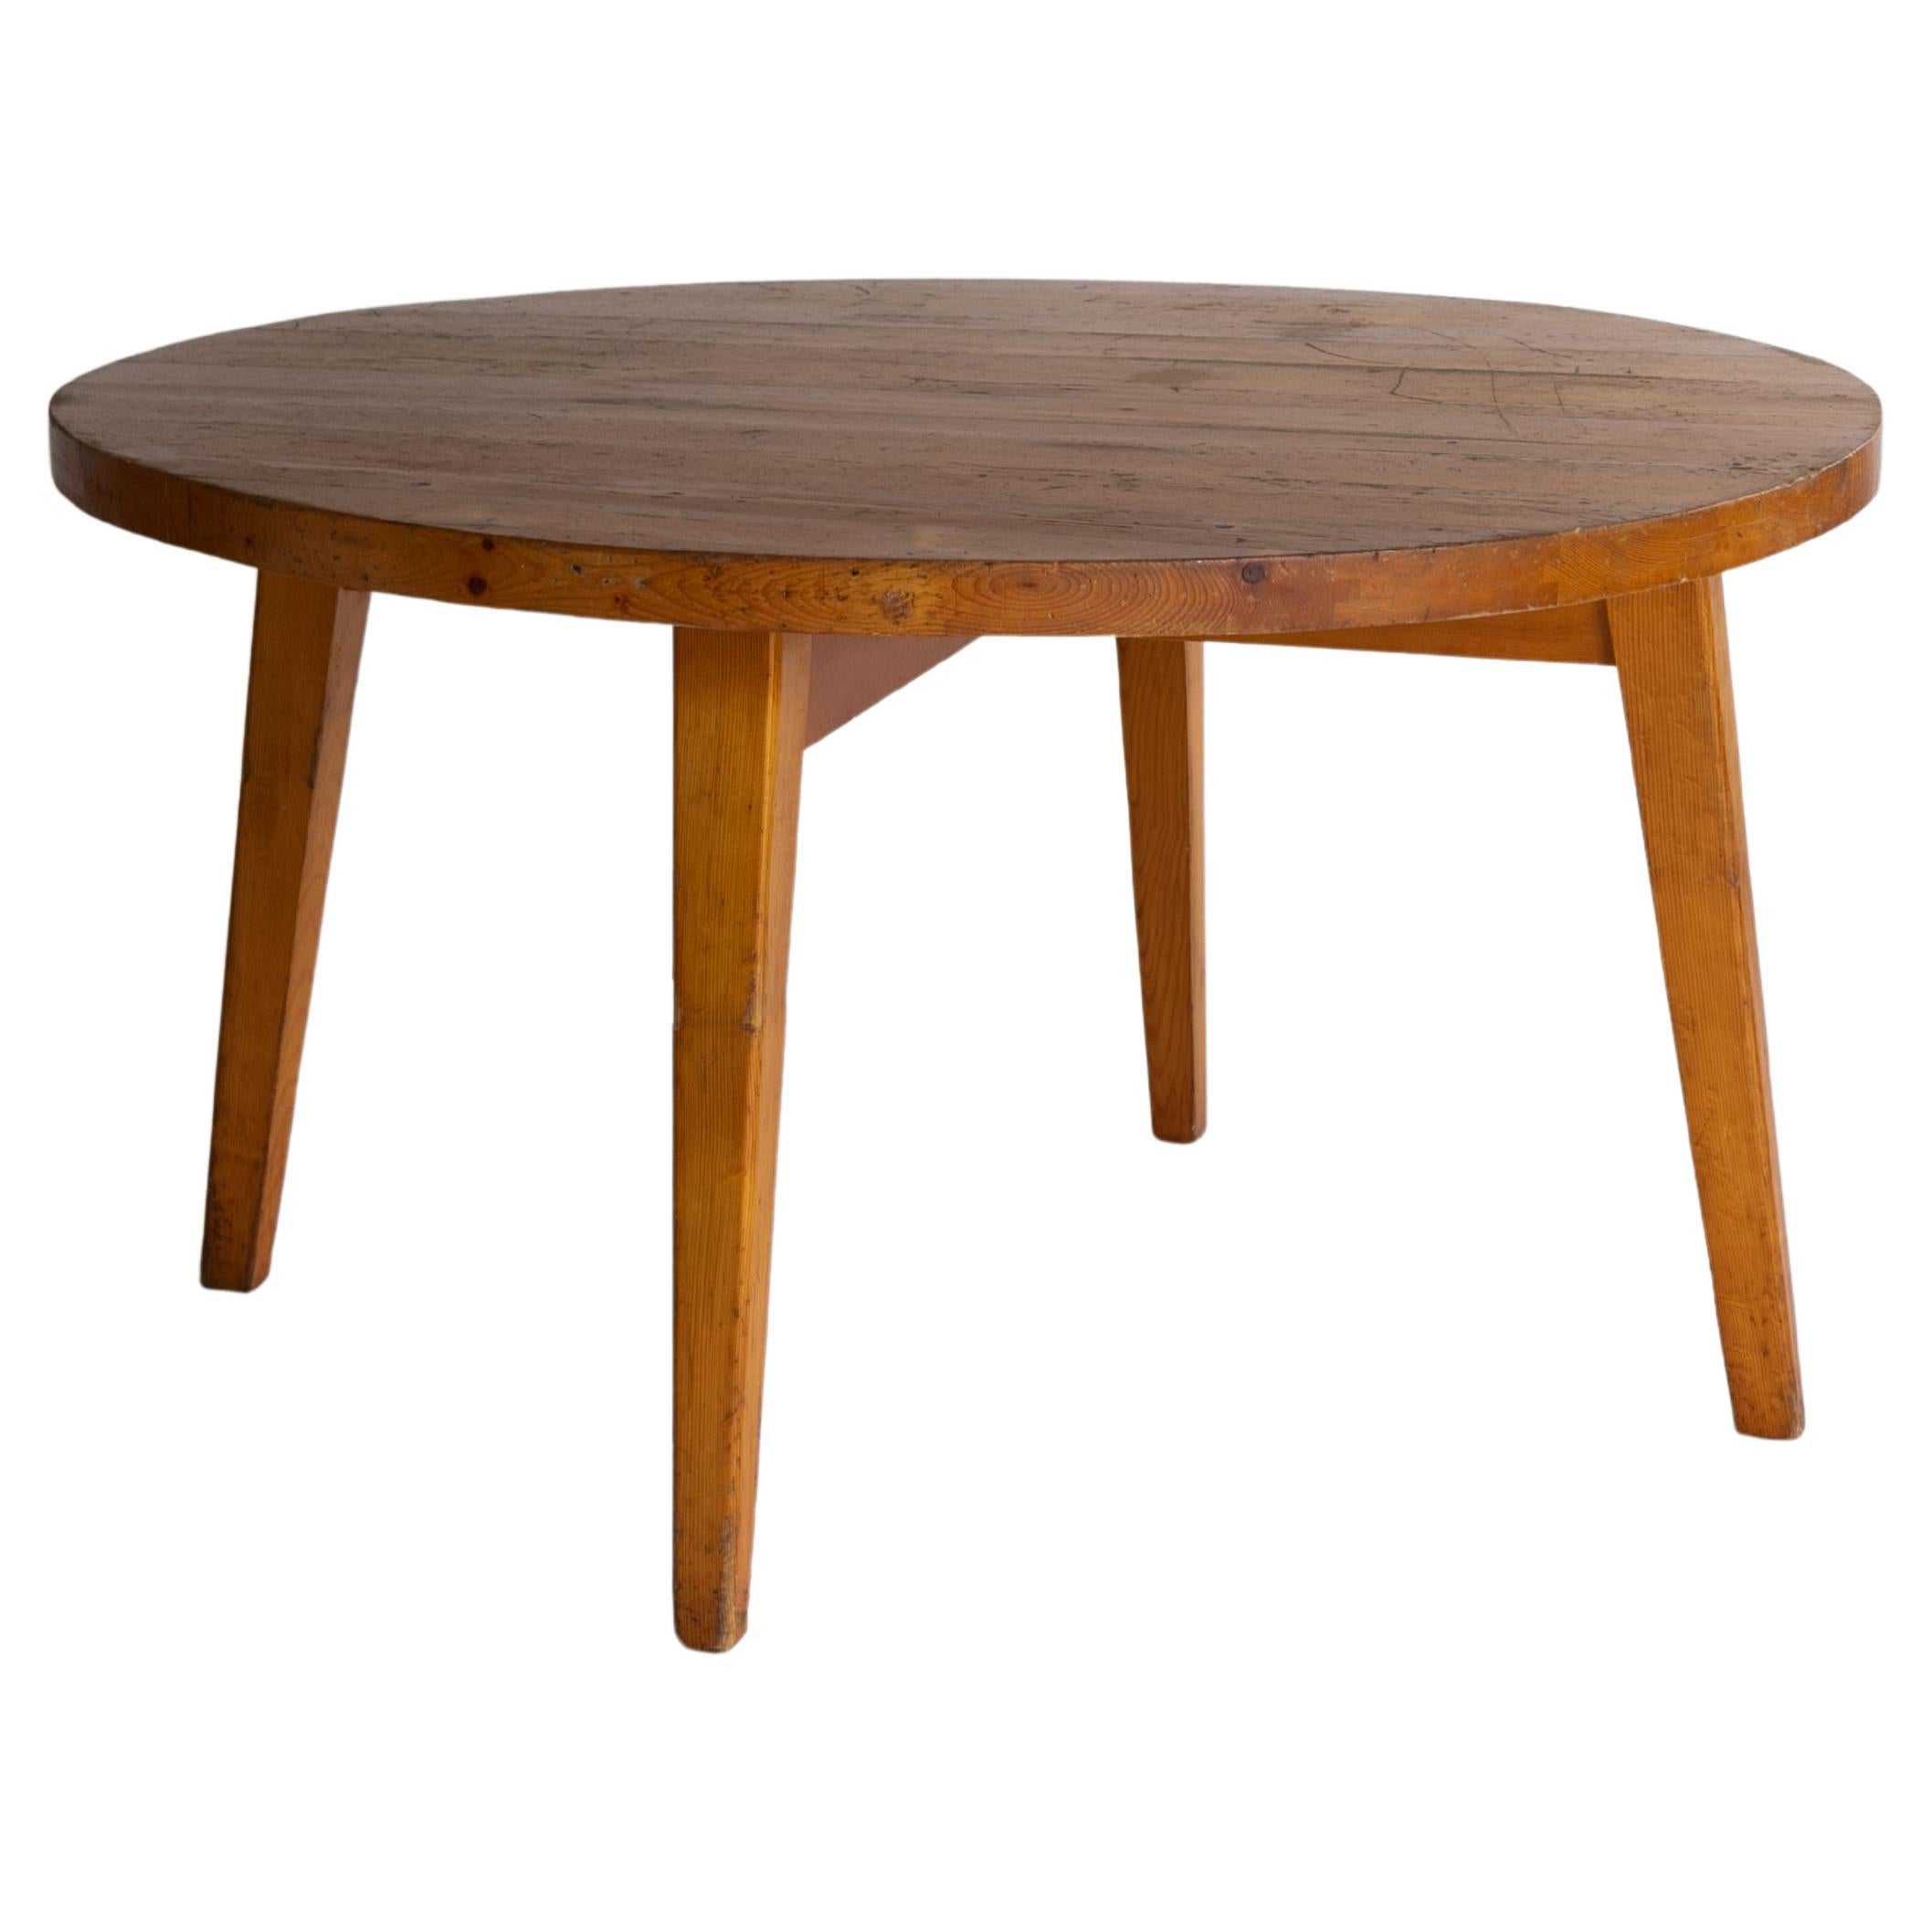 Vintage round table by Christian Durupt and Charlotte Perriand, 1968 For Sale